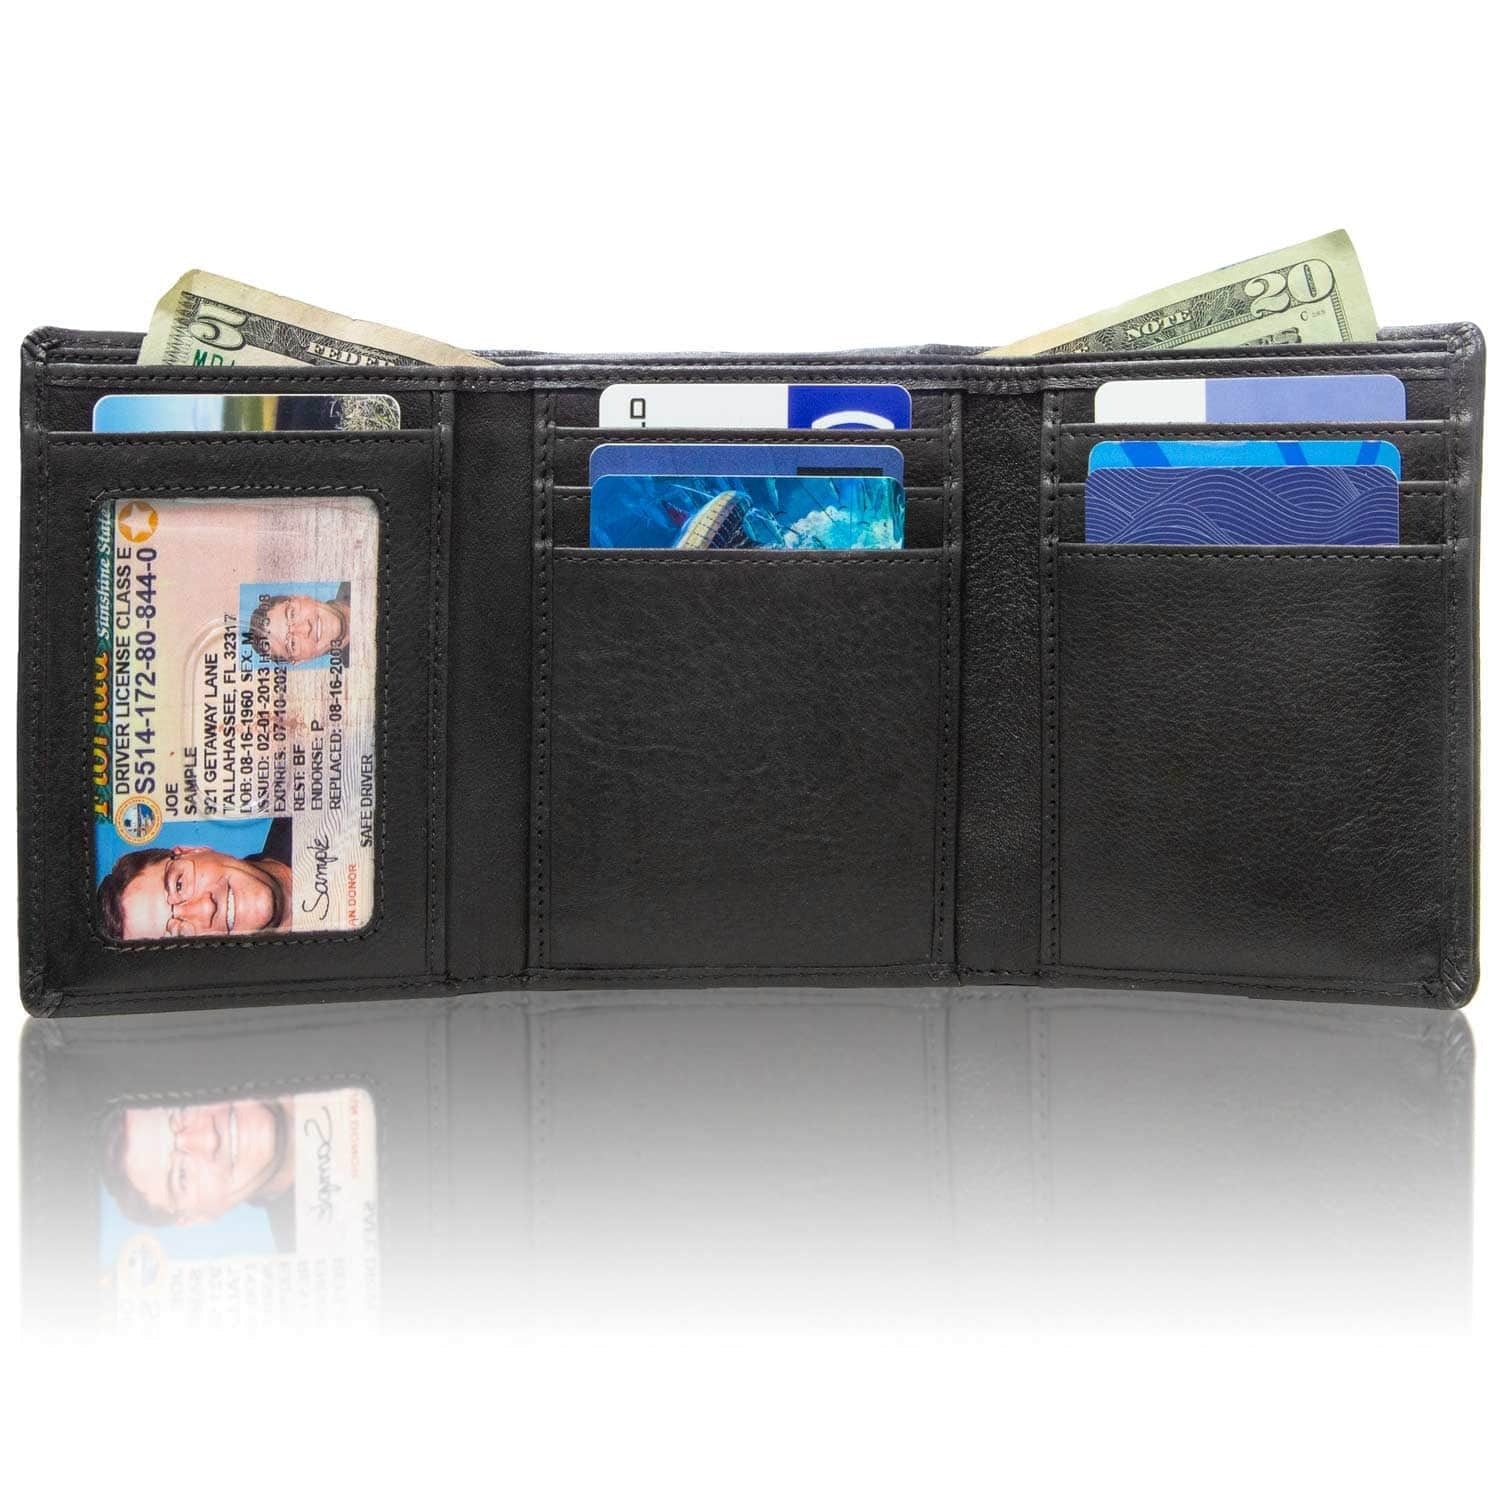 ID Stronghold Men's Wallet Mens RFID Wallet - Extra Capacity Trifold 8 slot with ID Window